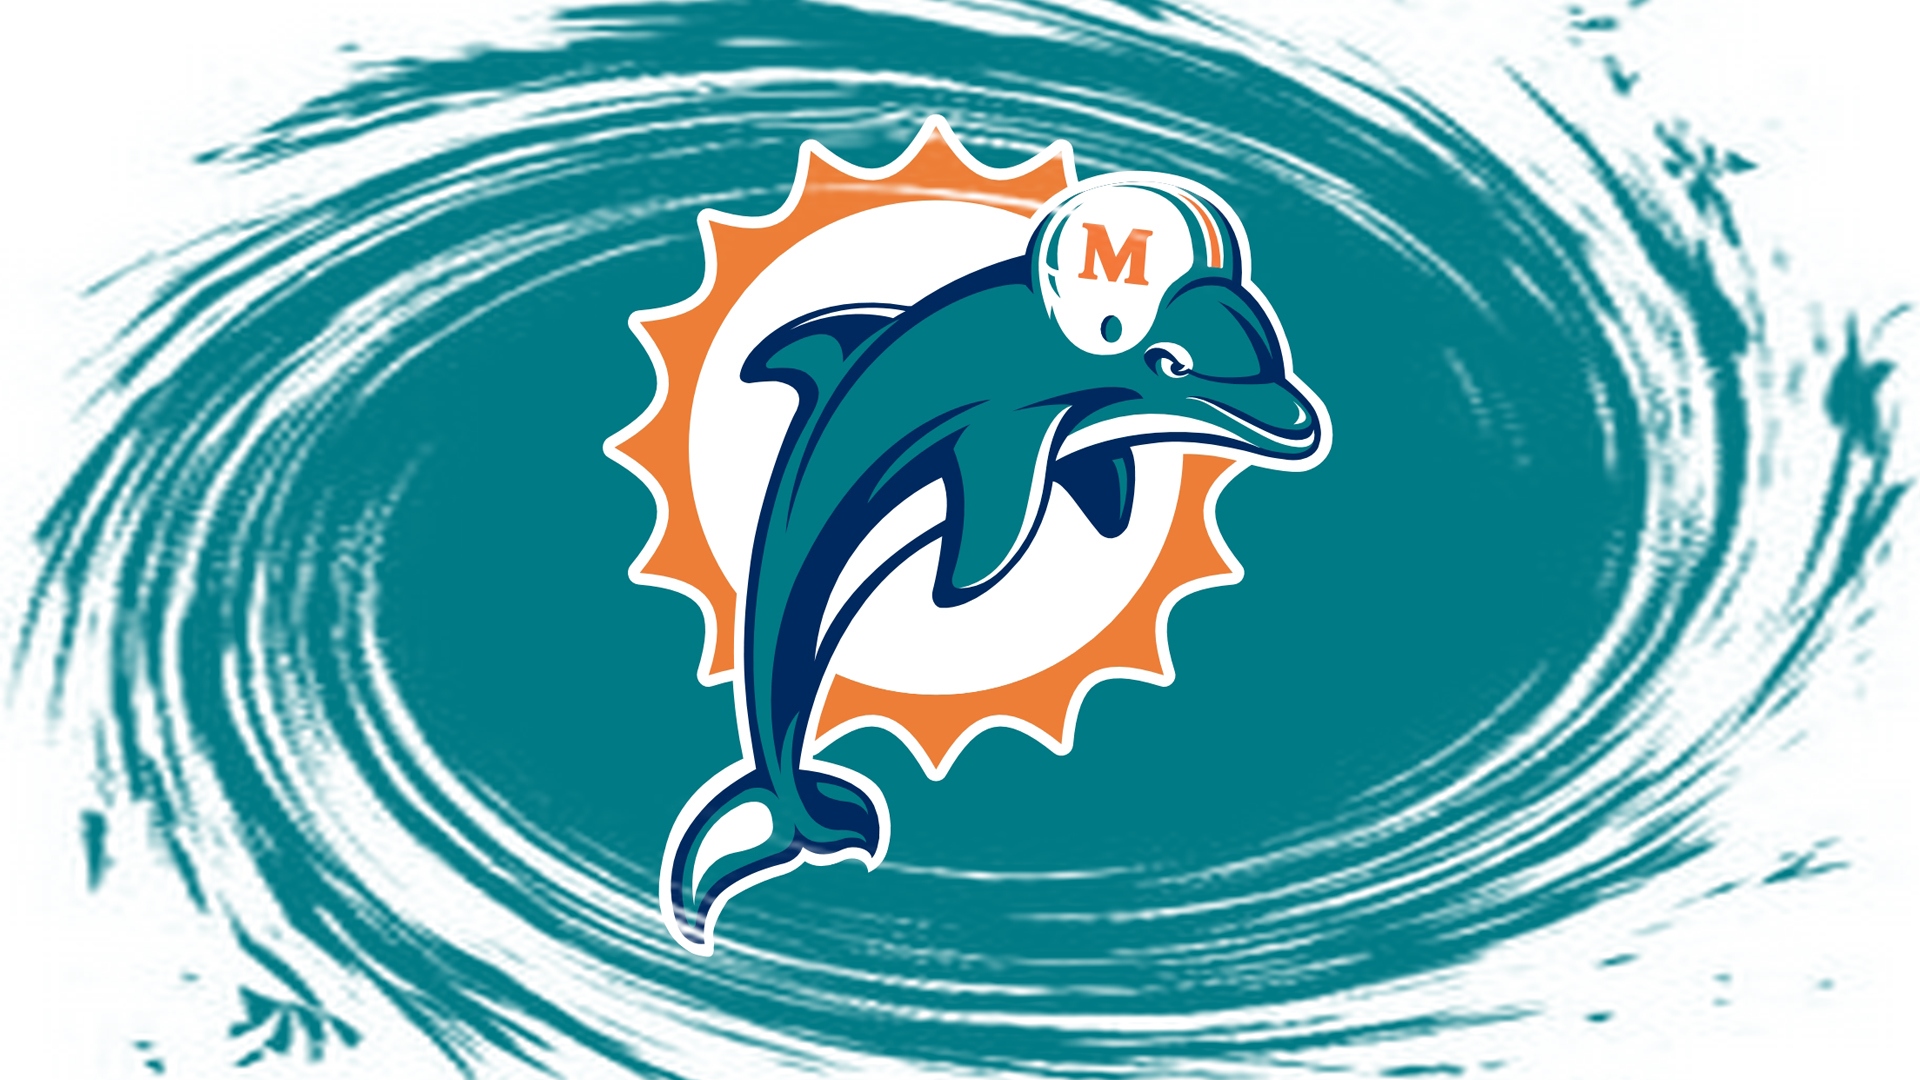 You Like This Miami Dolphins Wallpaper HD Background As Much We Do